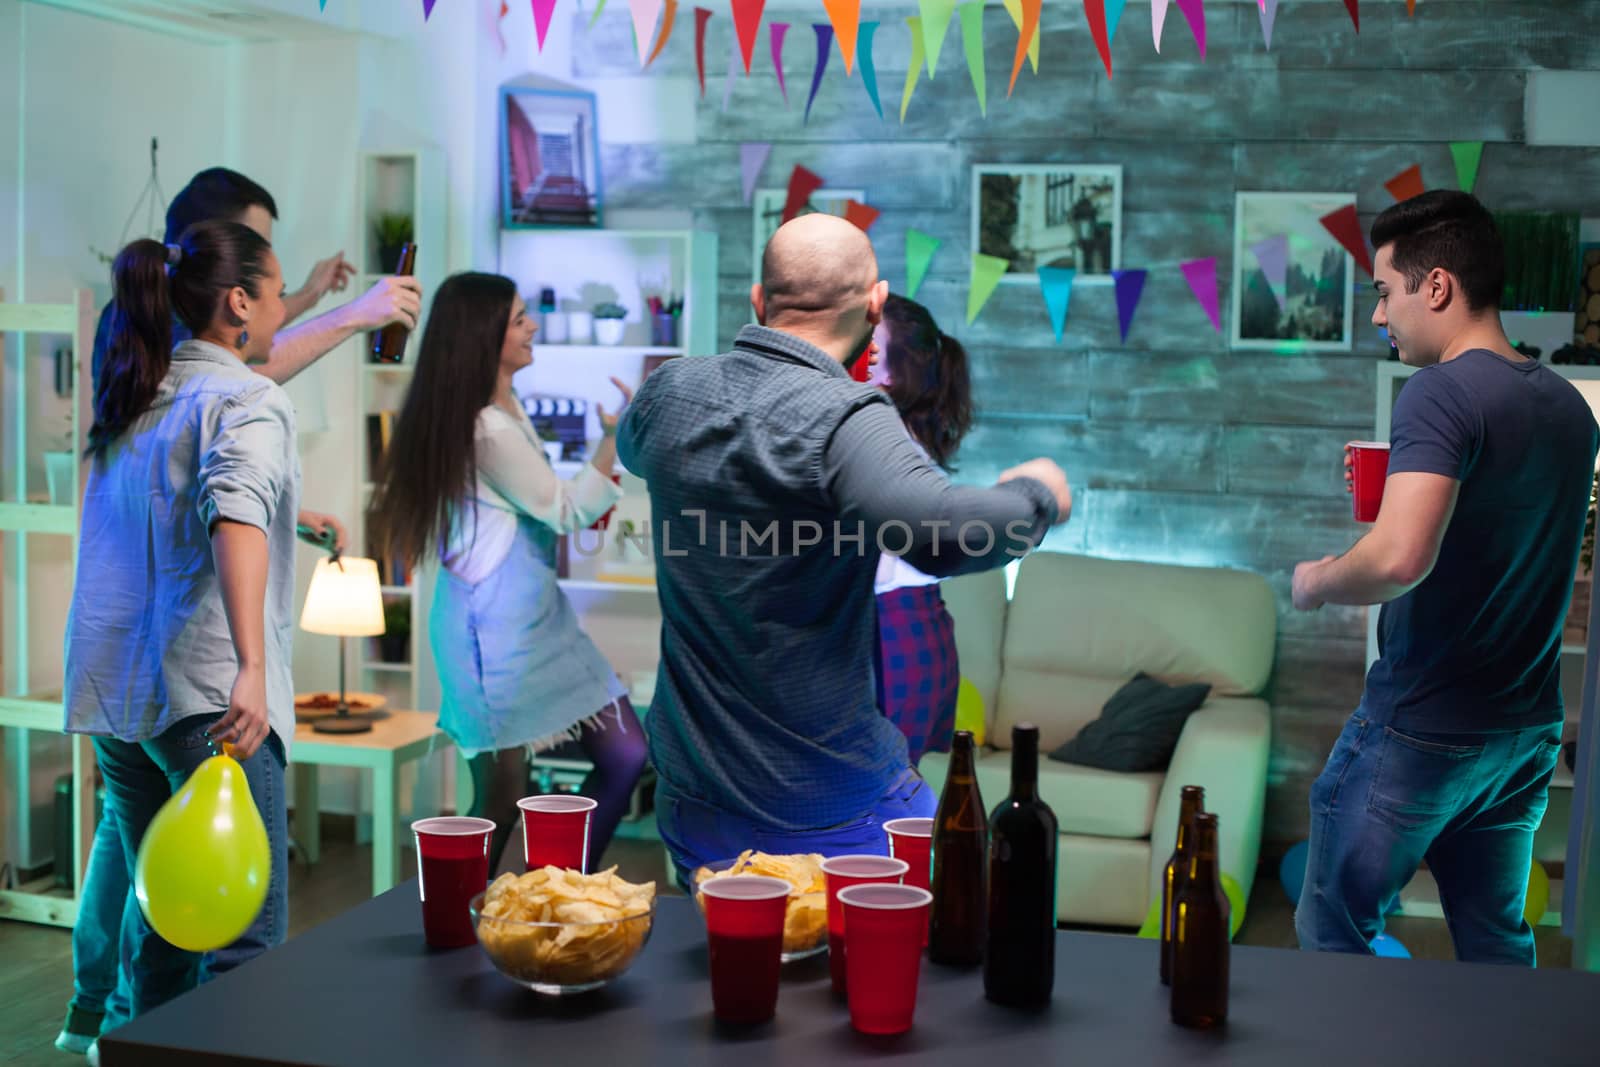 Back view of man dancing with his friends having a good time partying. Chips and balloons.